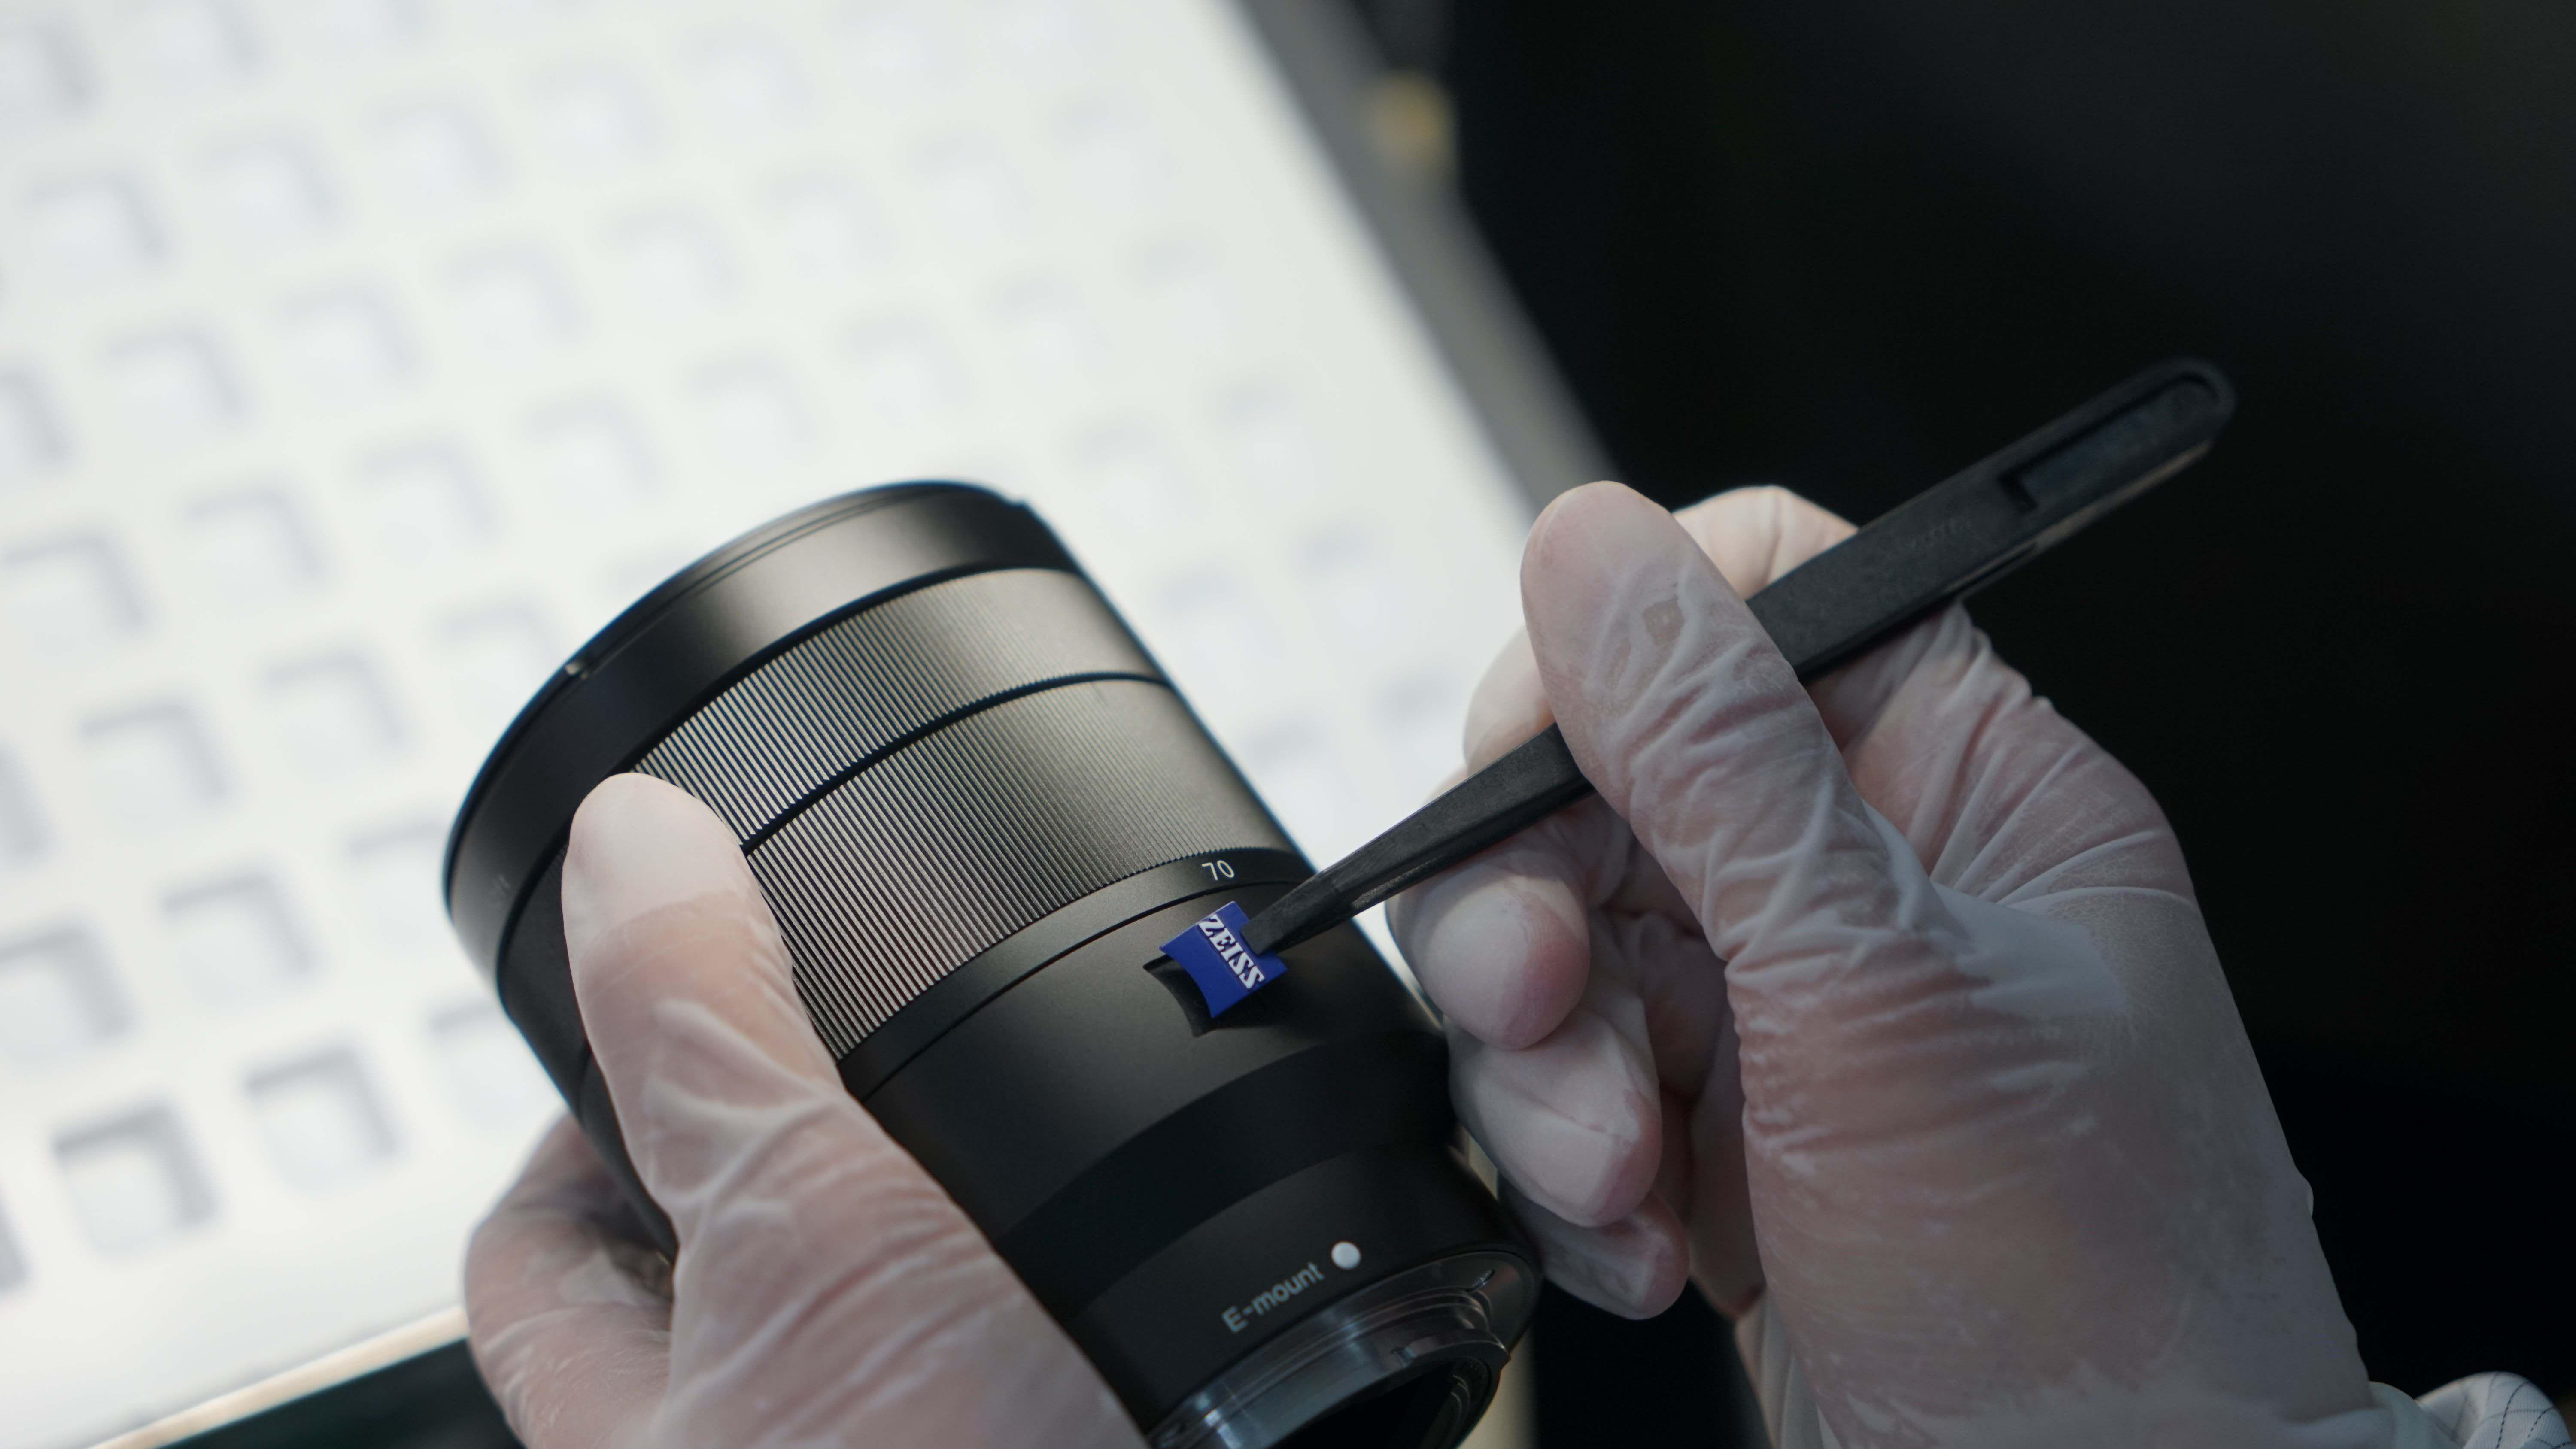 New Zeiss Logo - What's in a name? Zeiss provides details on lens partnerships